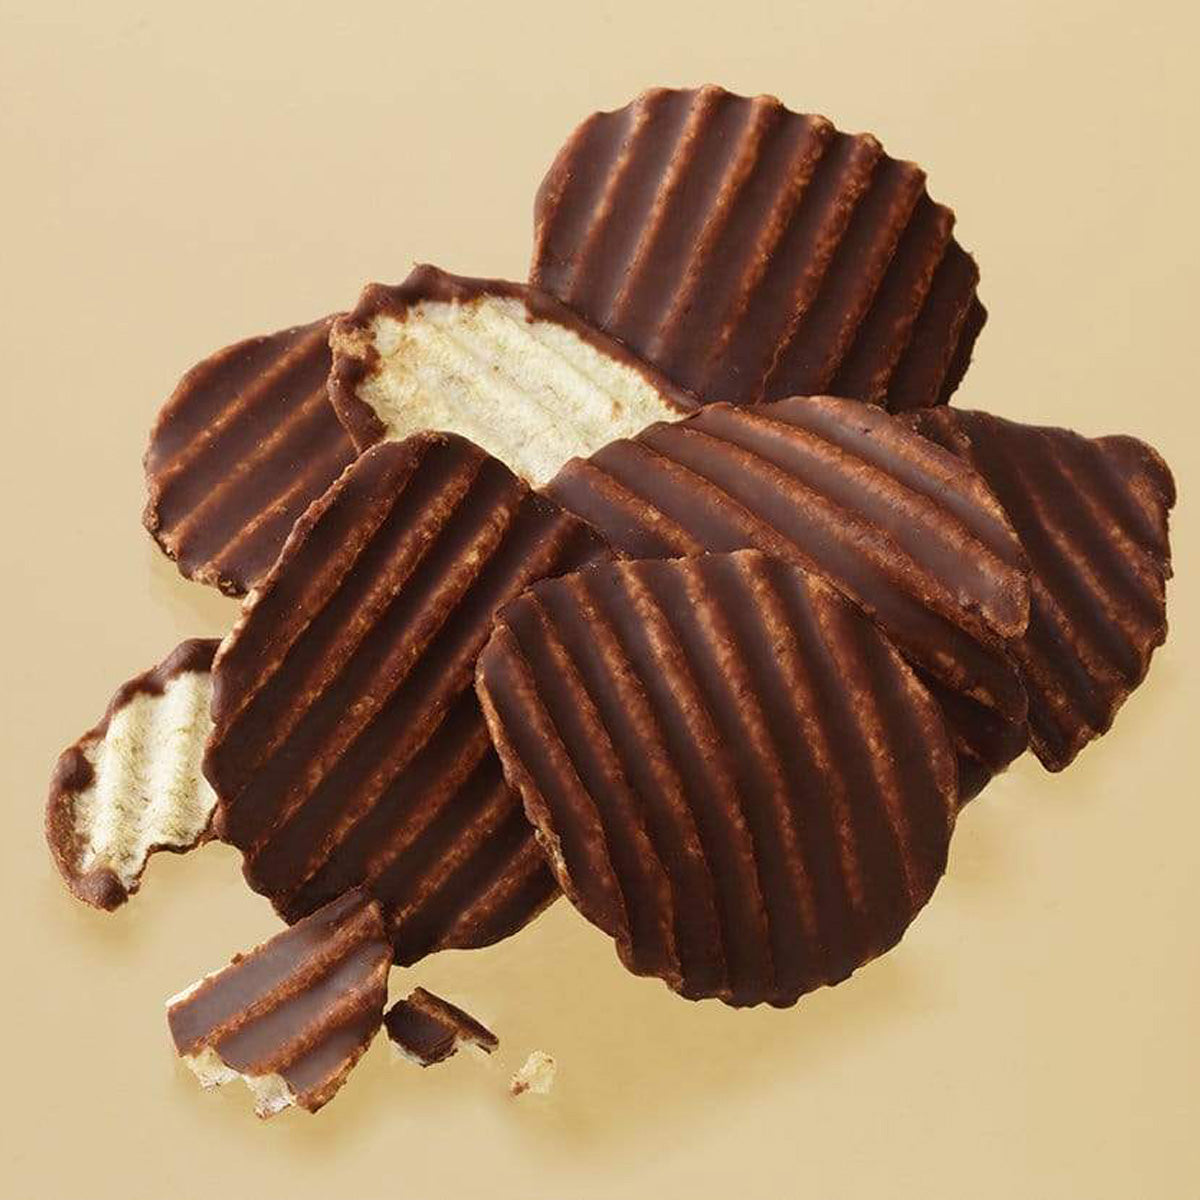 ROYCE' Chocolate - Potatochip Chocolate "Mild Bitter" - Image shows dark brown chocolate-covered potato chips with a ridged texture. Background is in light hue of brown.